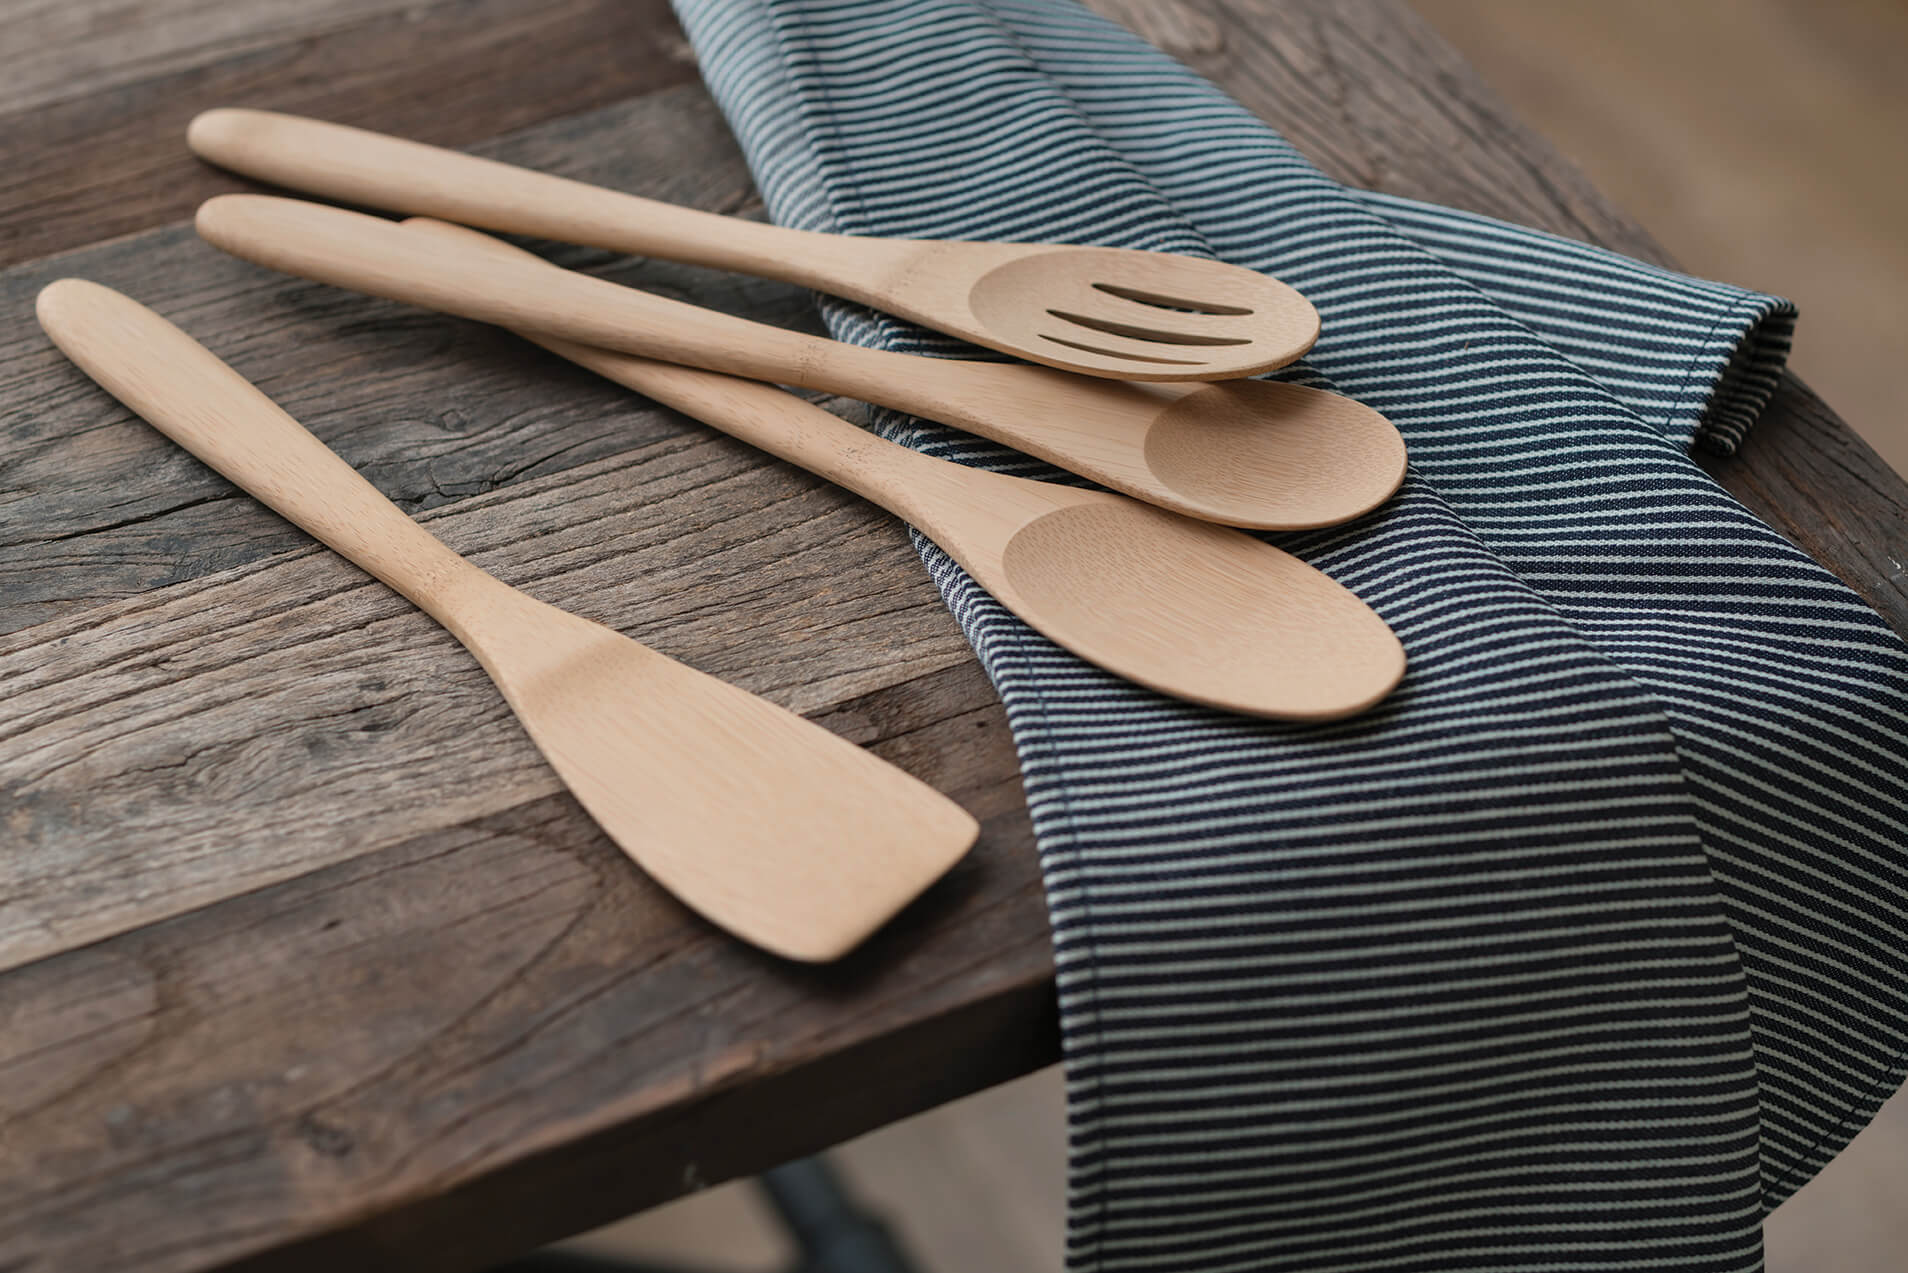 bambu® creates eco-friendly dinnerware & sustainable home goods. Specializing in certified organic products, disposable plates, kitchen utensils, cutlery, cutting boards made from renewable resources such as bamboo, cork, and more. Shop now.